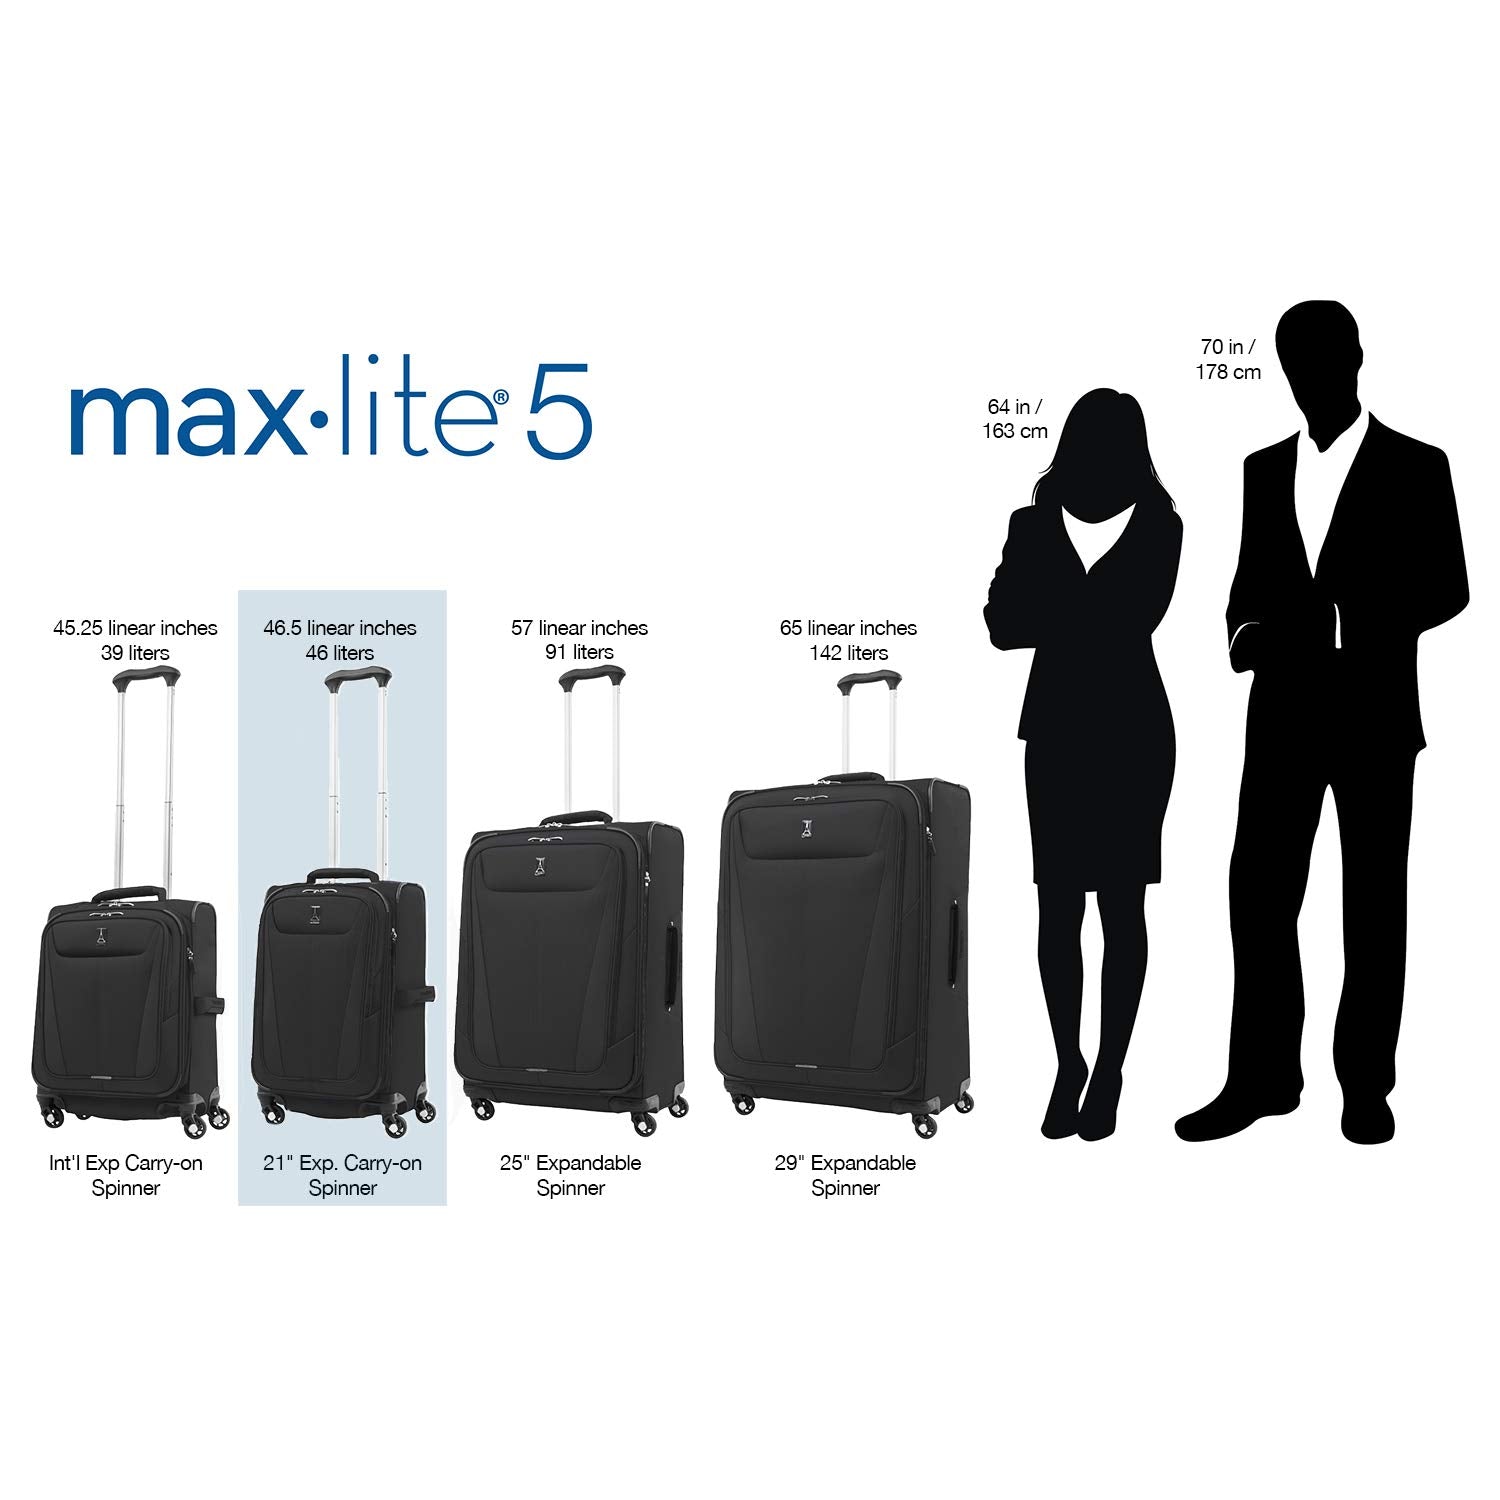 Travelpro Maxlite 5 Softside Expandable Luggage with 4 Spinner Wheels, Lightweight Suitcase, Men and Women U3